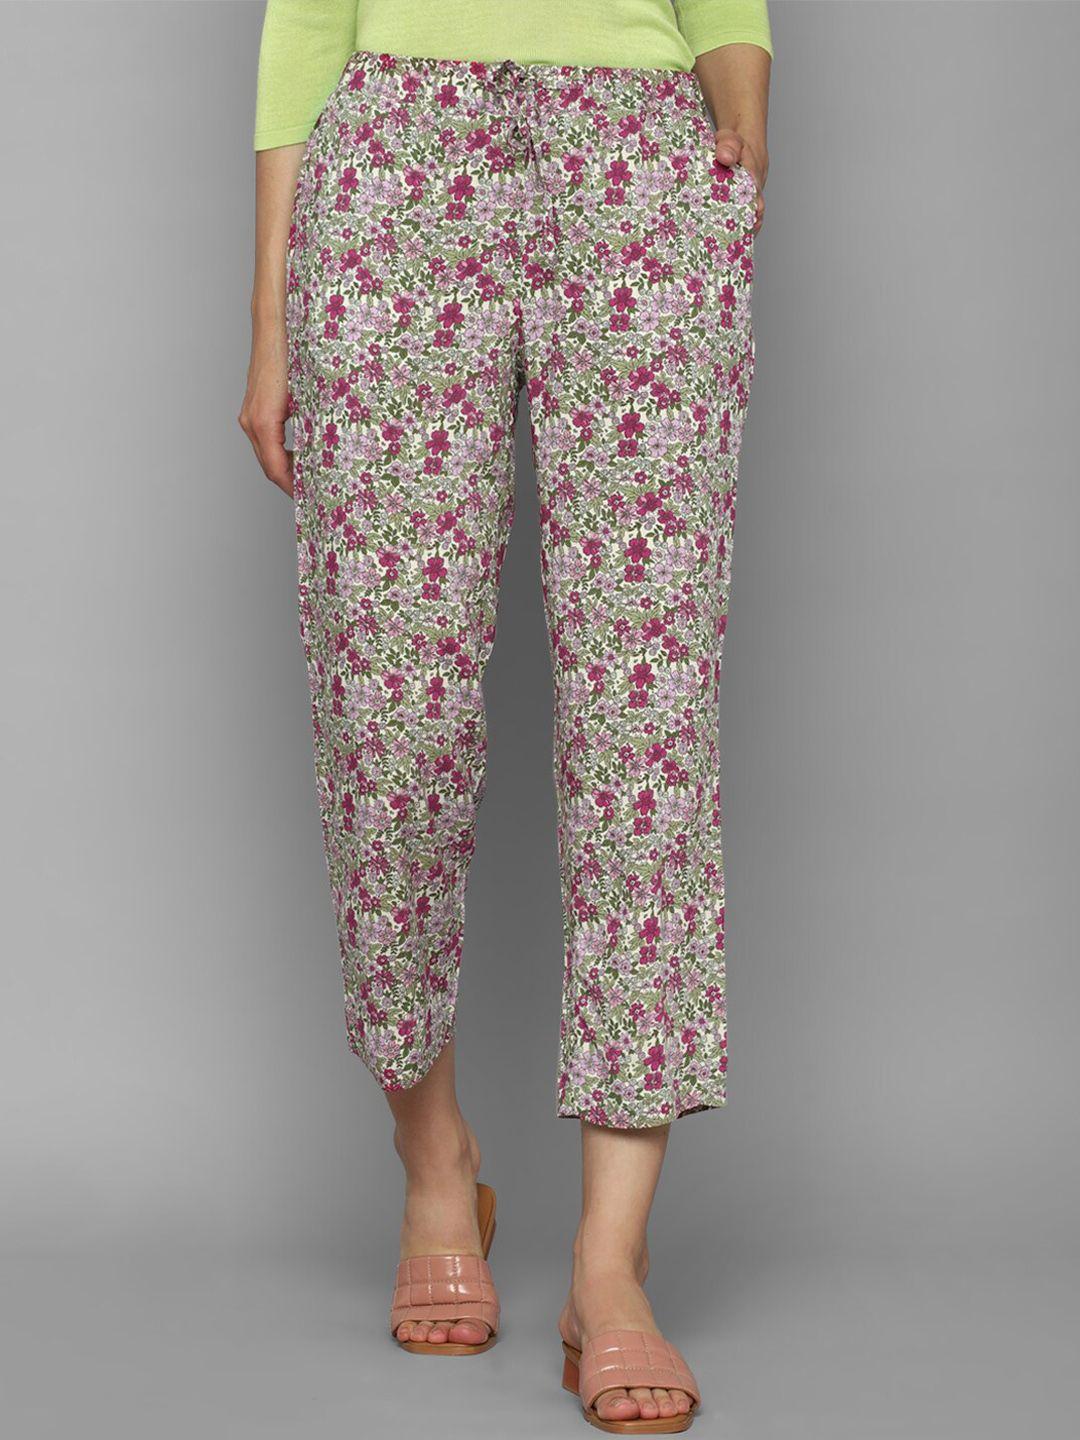 allen-solly-woman-women-multicoloured-floral-printed-trousers